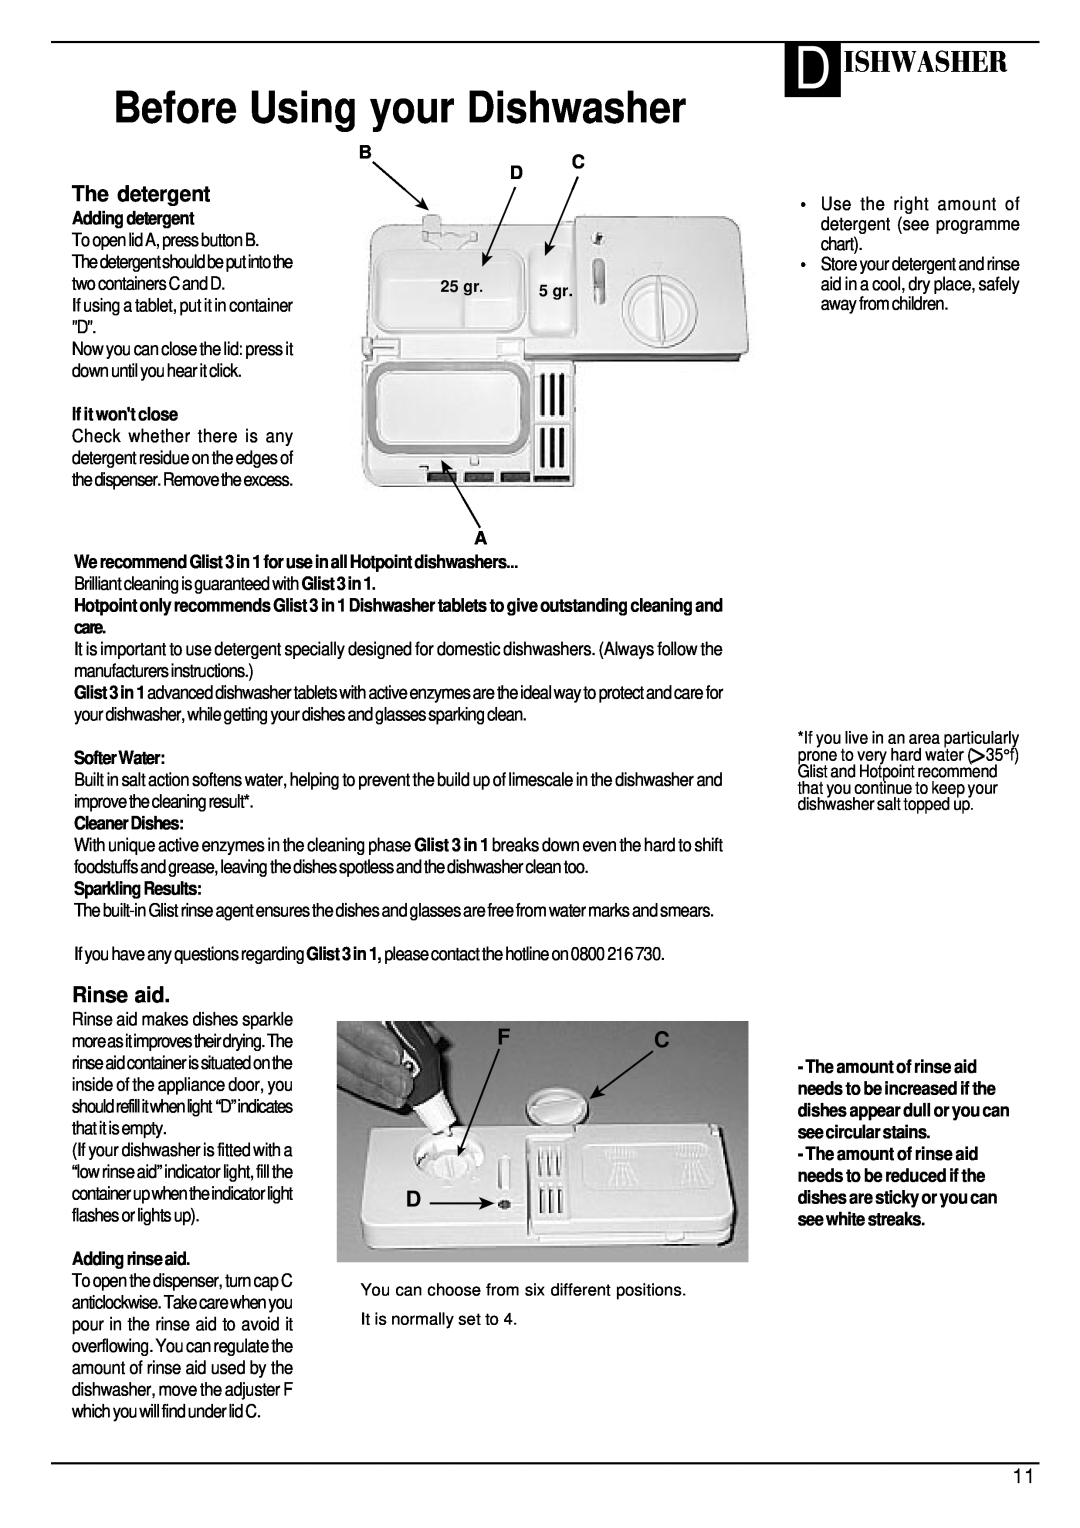 Hotpoint BFV620 Before Using your Dishwasher, D Ishwasher, The detergent, Rinse aid, Fc D, Bc D, Adding detergent, 25 gr 